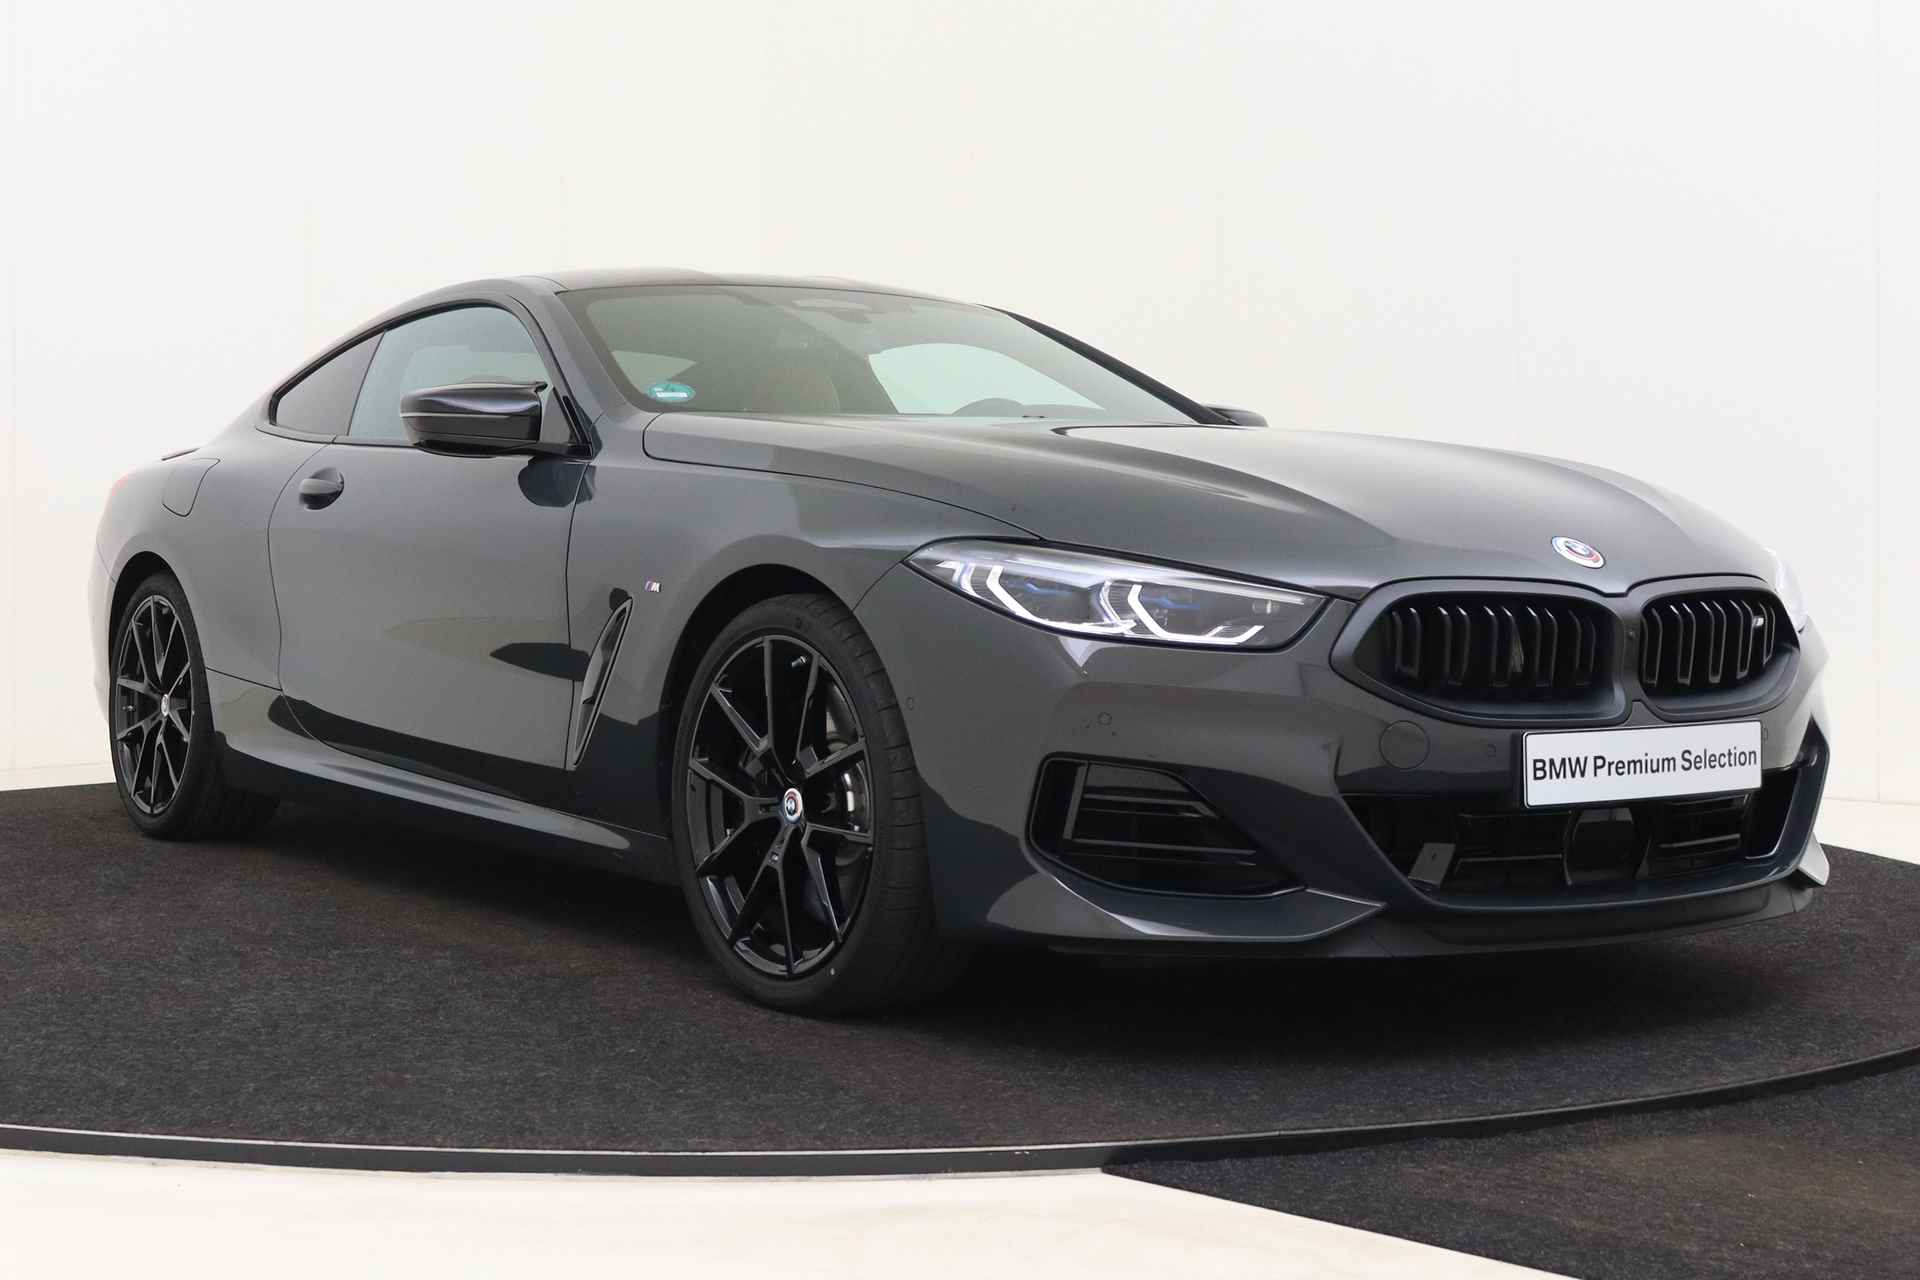 BMW 8 Serie M850i xDrive High Executive M Sport / M Carbondak / Laserlight / Bowers & Wilkins / 50 Jahre M Edition / Driving Assistant Professional / Soft Close - 14/81